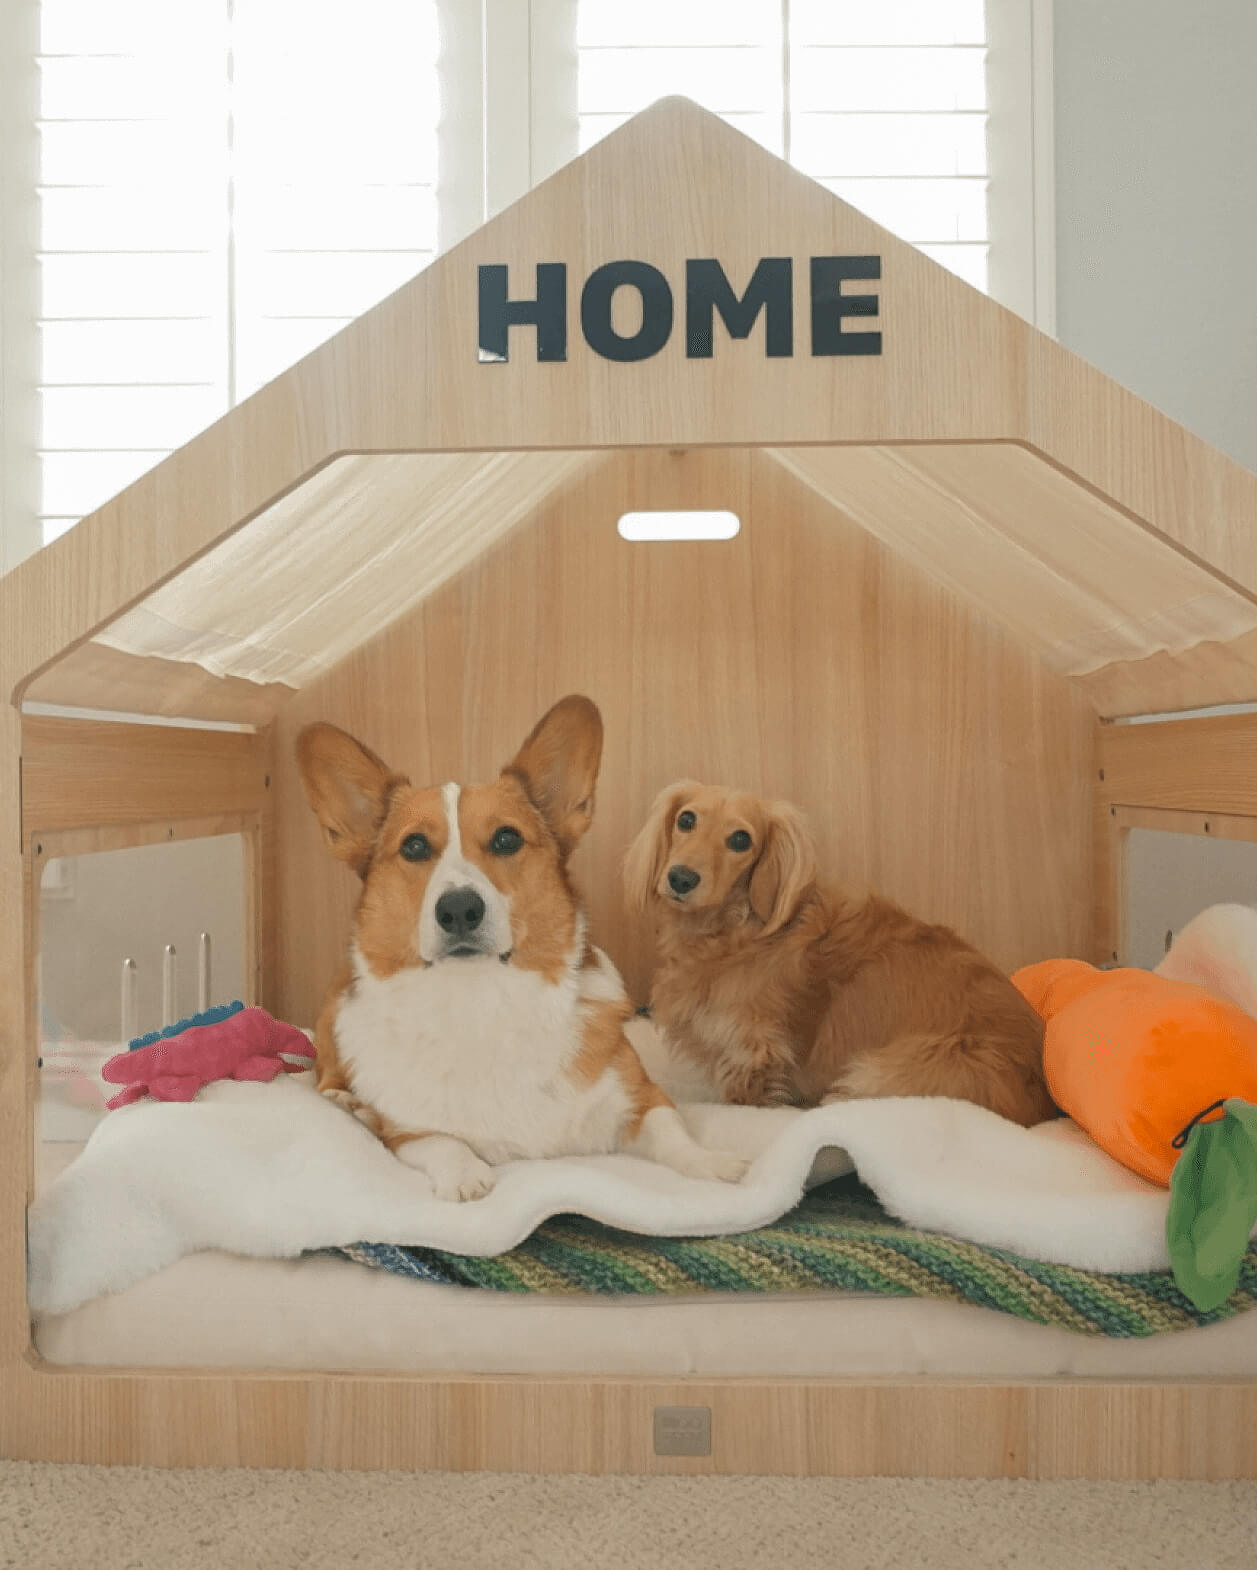 A Welsh Corgi and a Dachshund sit together in the Wooffy modern dog house